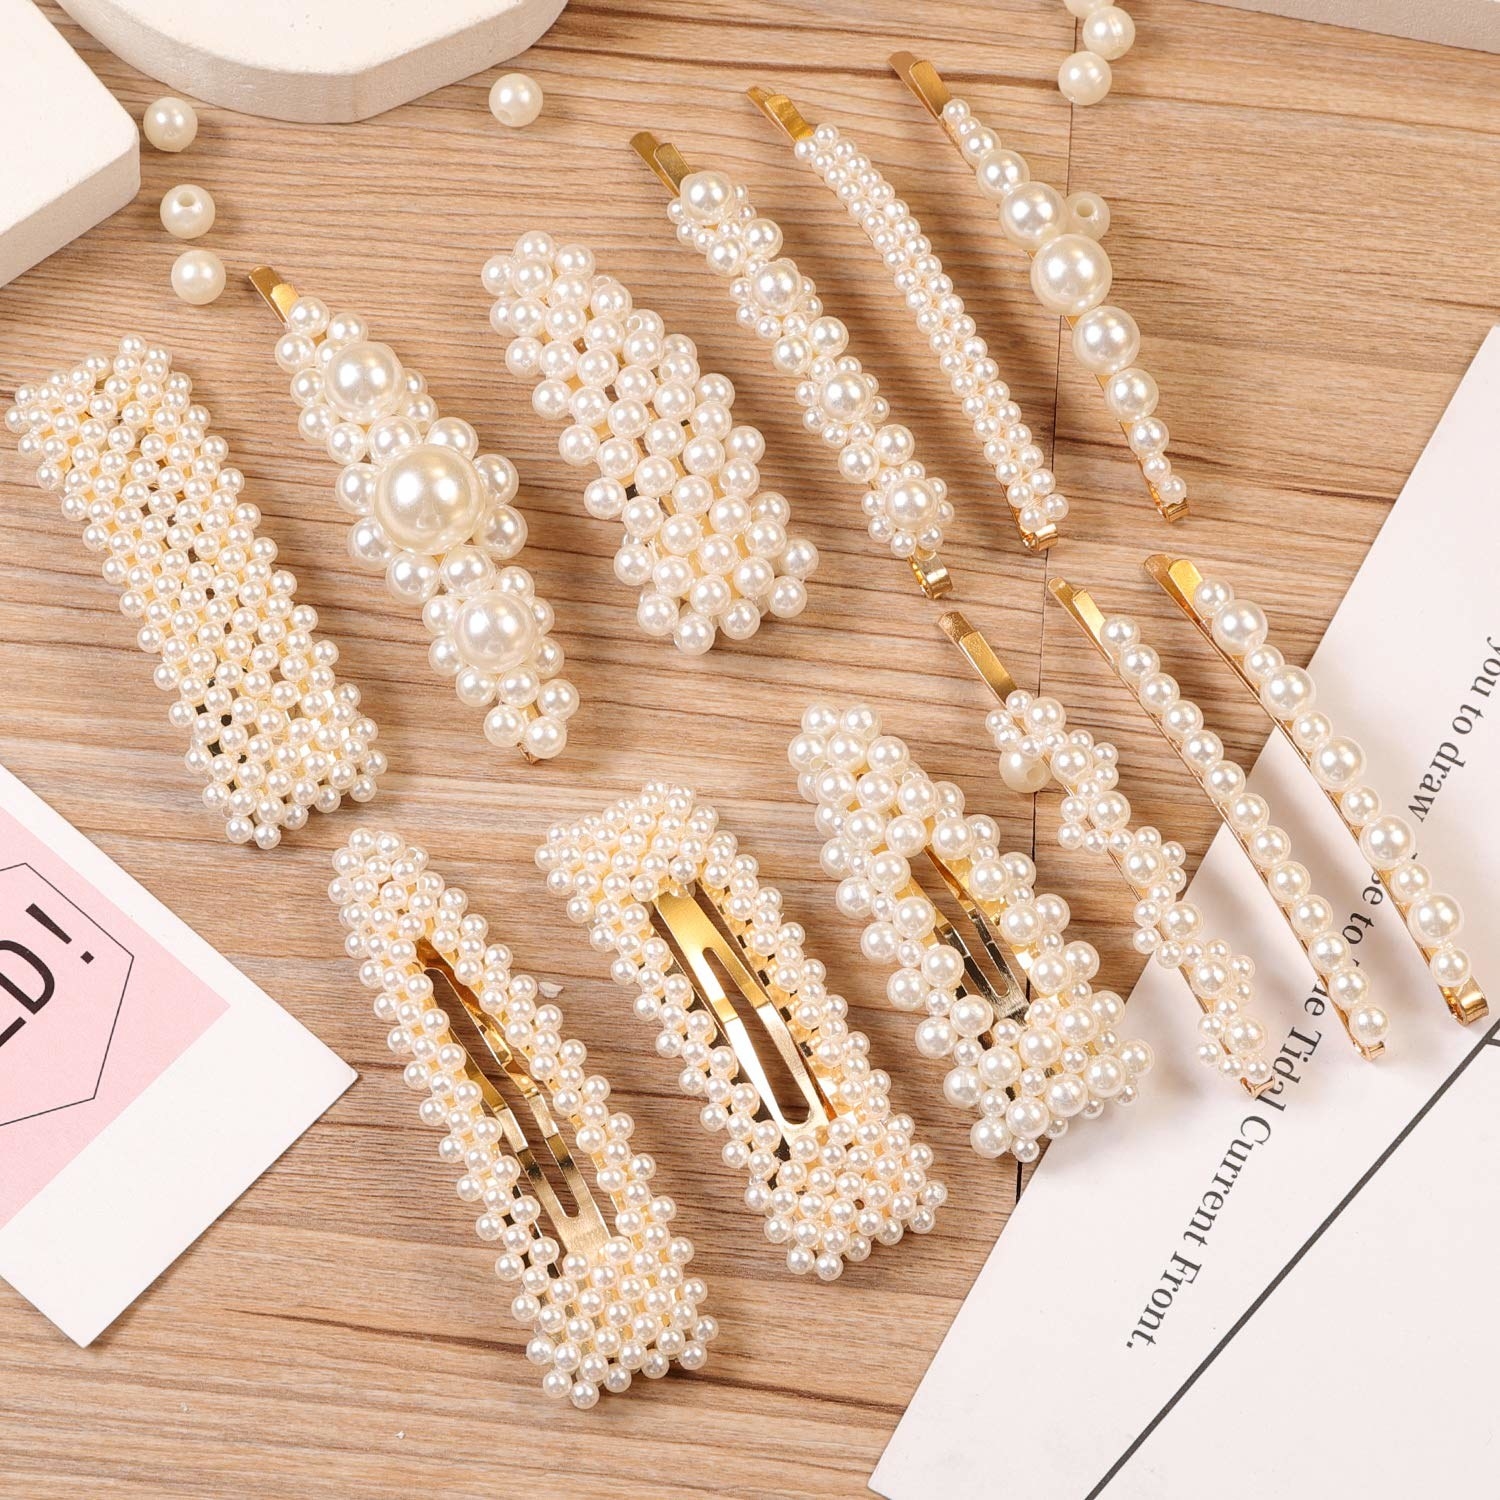 The clips, each covered in faux pearls